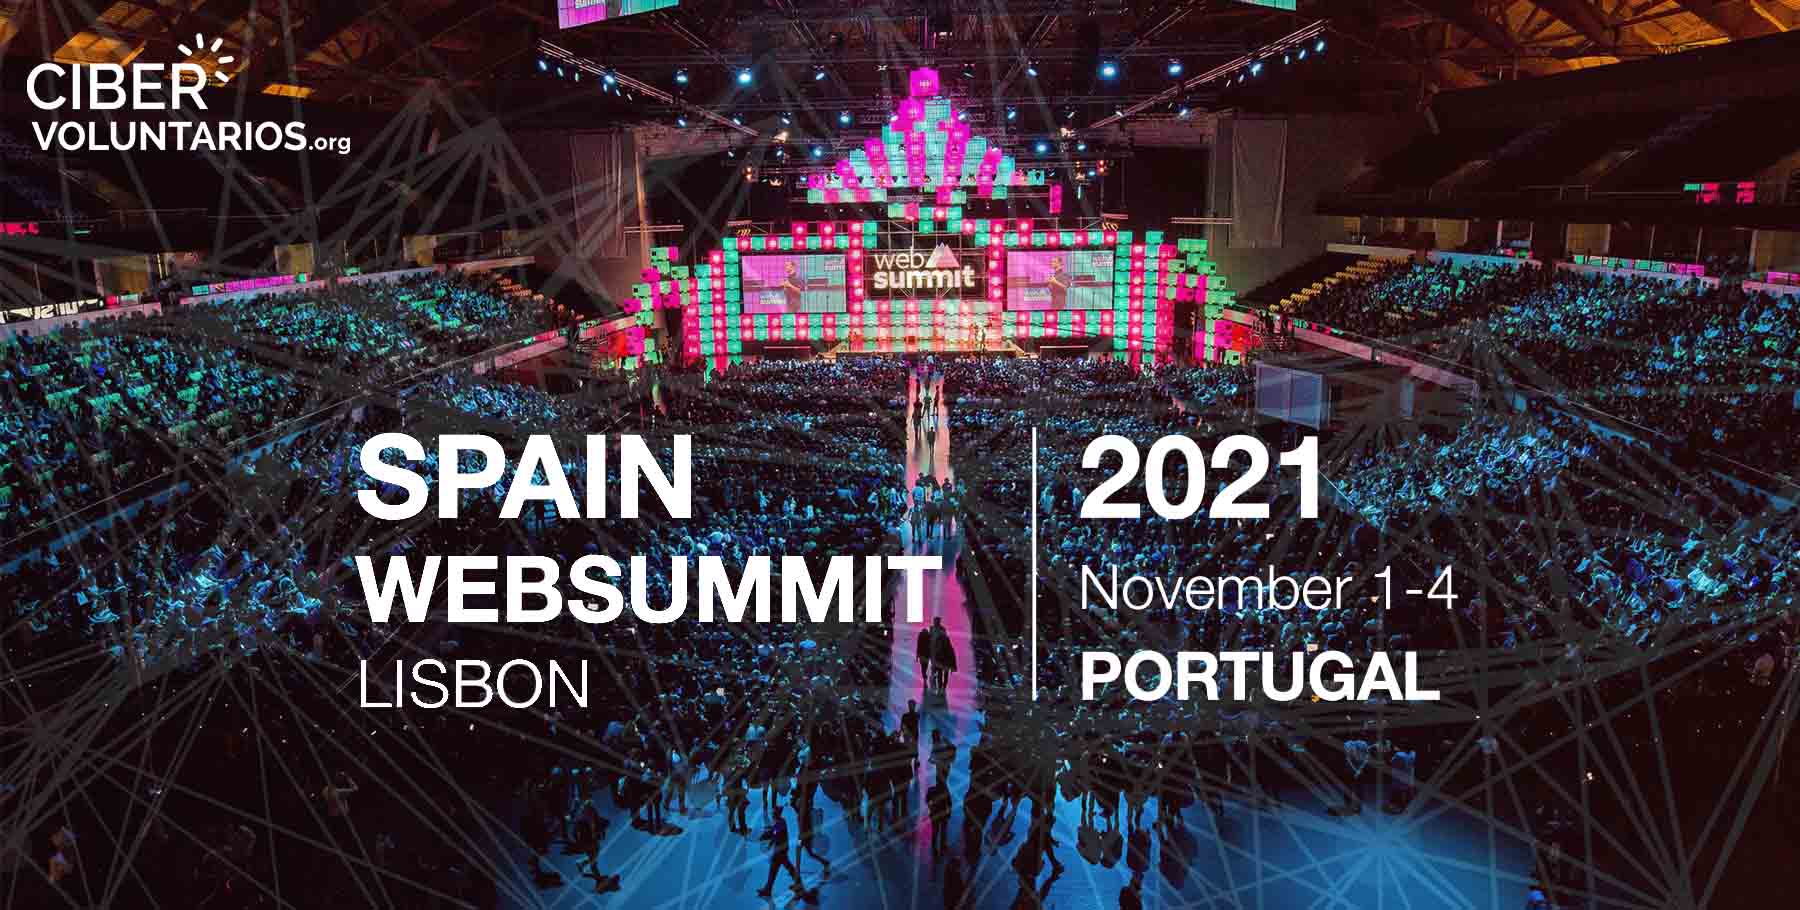 Cibervoluntarios is one of the 35 entities in the Spanish pavilion at the Web Summit 2021 Lisbon